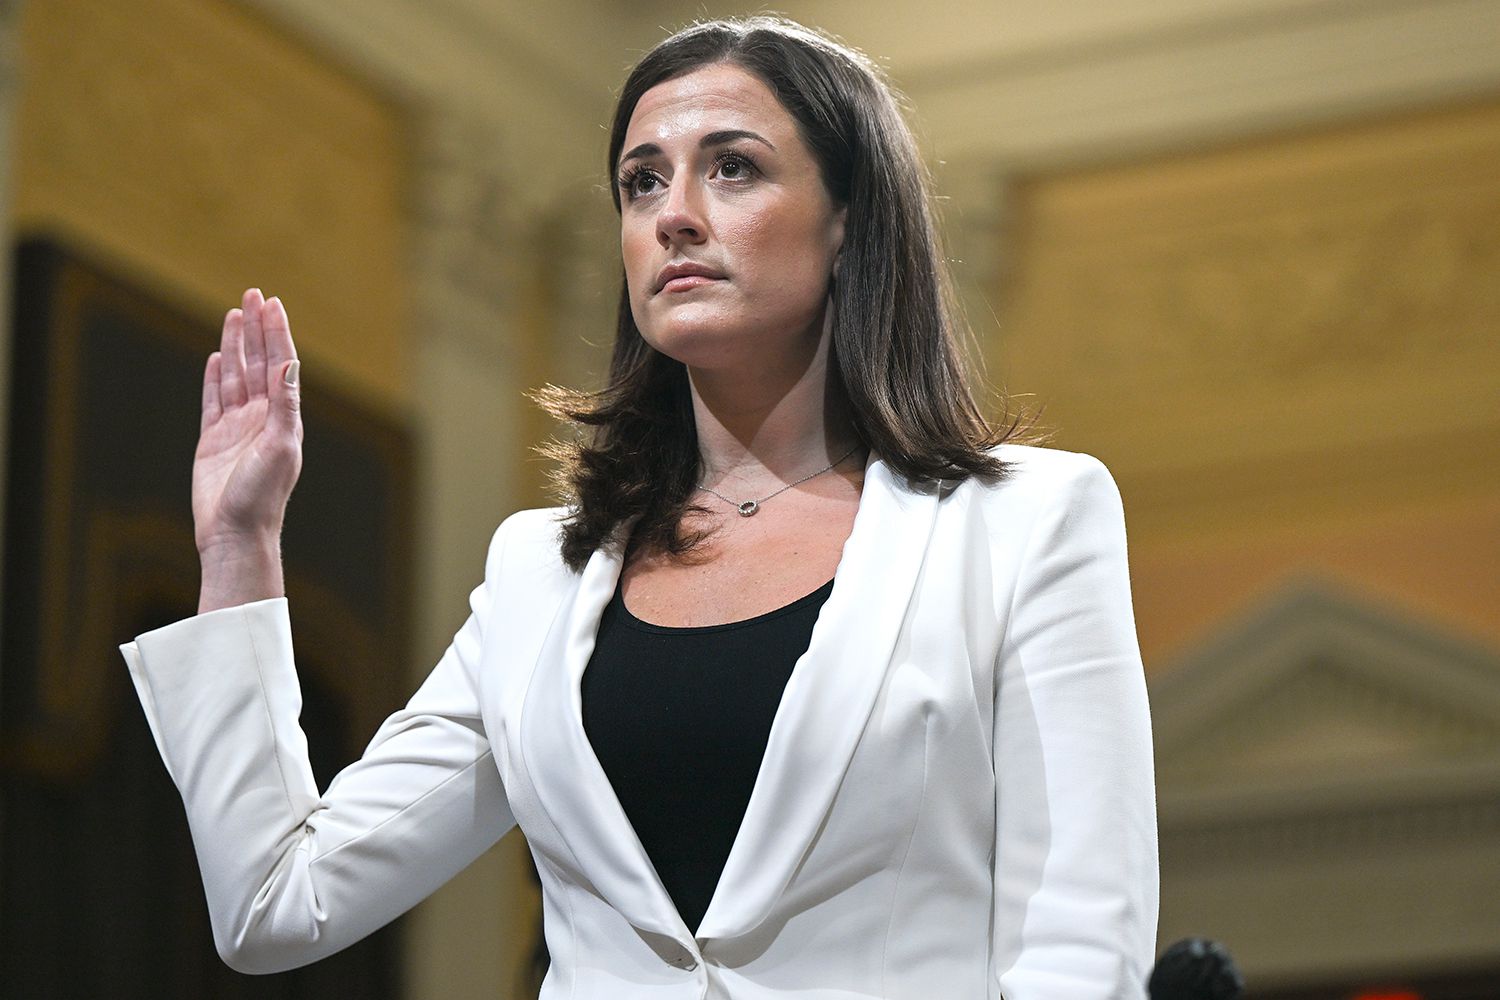 Cassidy Hutchinson, a top former aide to Trump White House Chief of Staff Mark Meadows, is sworn-in as she testifies during the sixth hearing by the House Select Committee on the January 6th insurrection in the Cannon House Office Building on June 28, 2022 in Washington, DC. The bipartisan committee, which has been gathering evidence for almost a year related to the January 6 attack at the U.S. Capitol, is presenting its findings in a series of televised hearings. On January 6, 2021, supporters of former President Donald Trump attacked the U.S. Capitol Building during an attempt to disrupt a congressional vote to confirm the electoral college win for President Joe Biden.